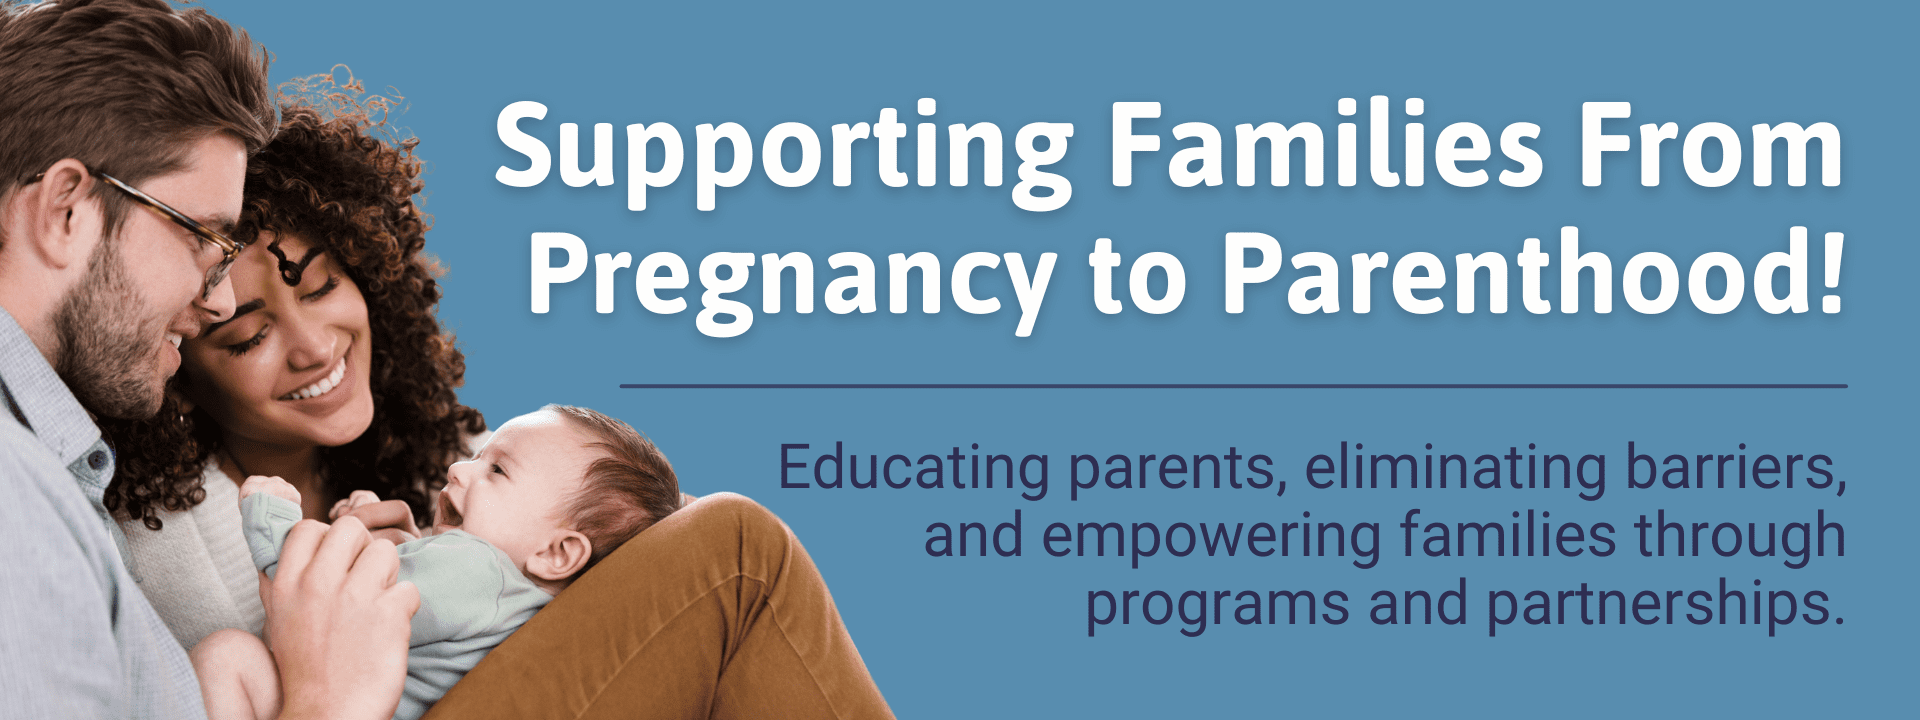 Supporting Families from Pregnancy to Parenthood